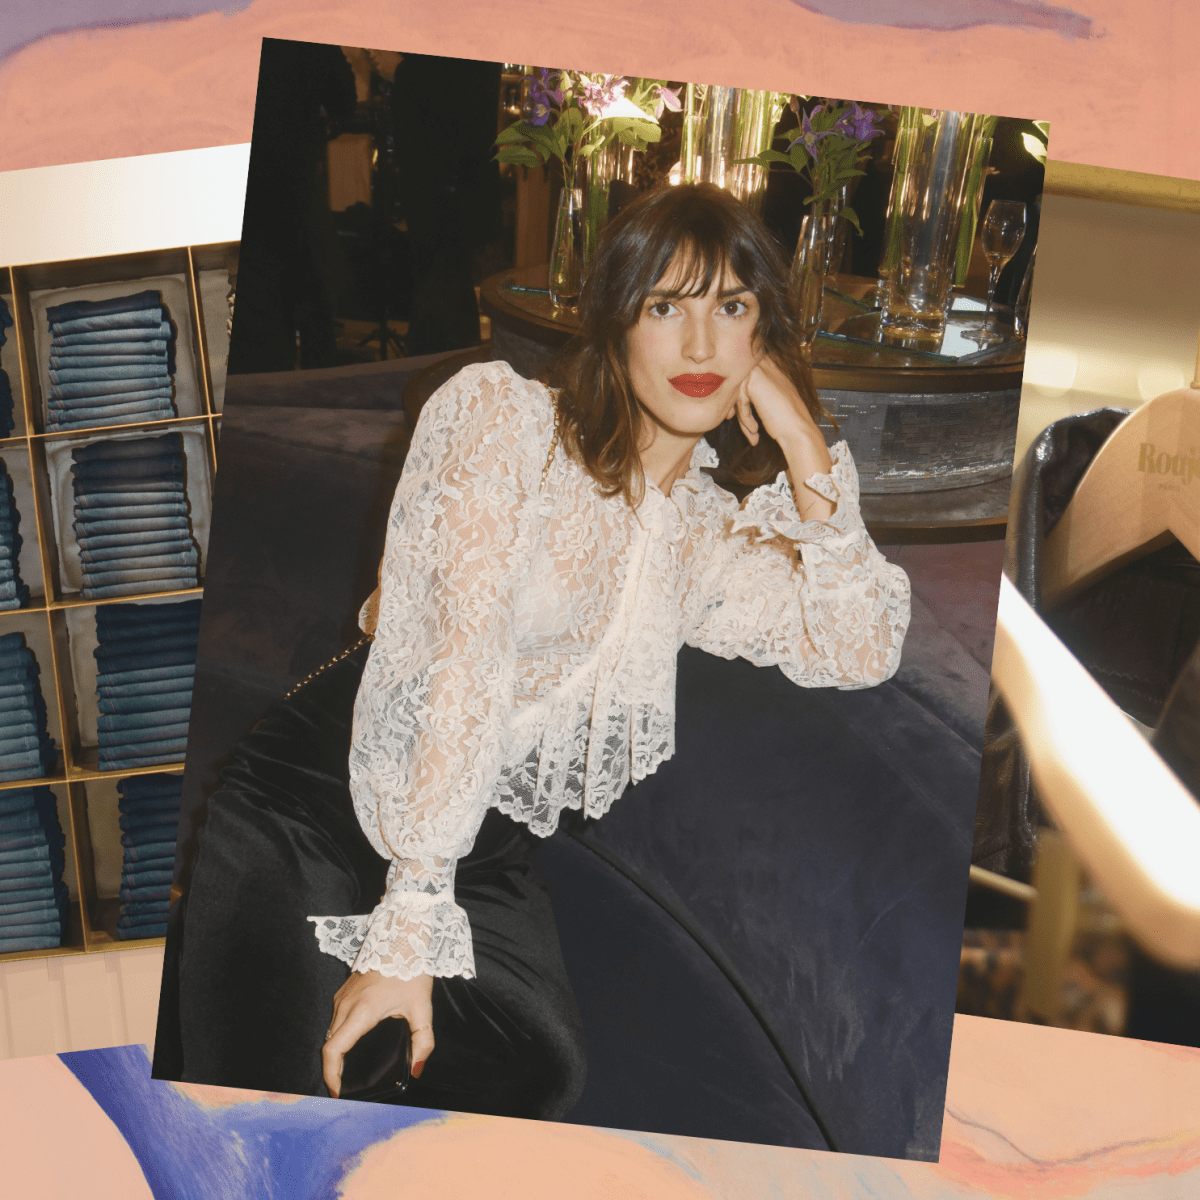 Jeanne Damas,,all black,,,pants and lace top,perfect  Lace top outfits,  Jeanne damas style, Parisienne style